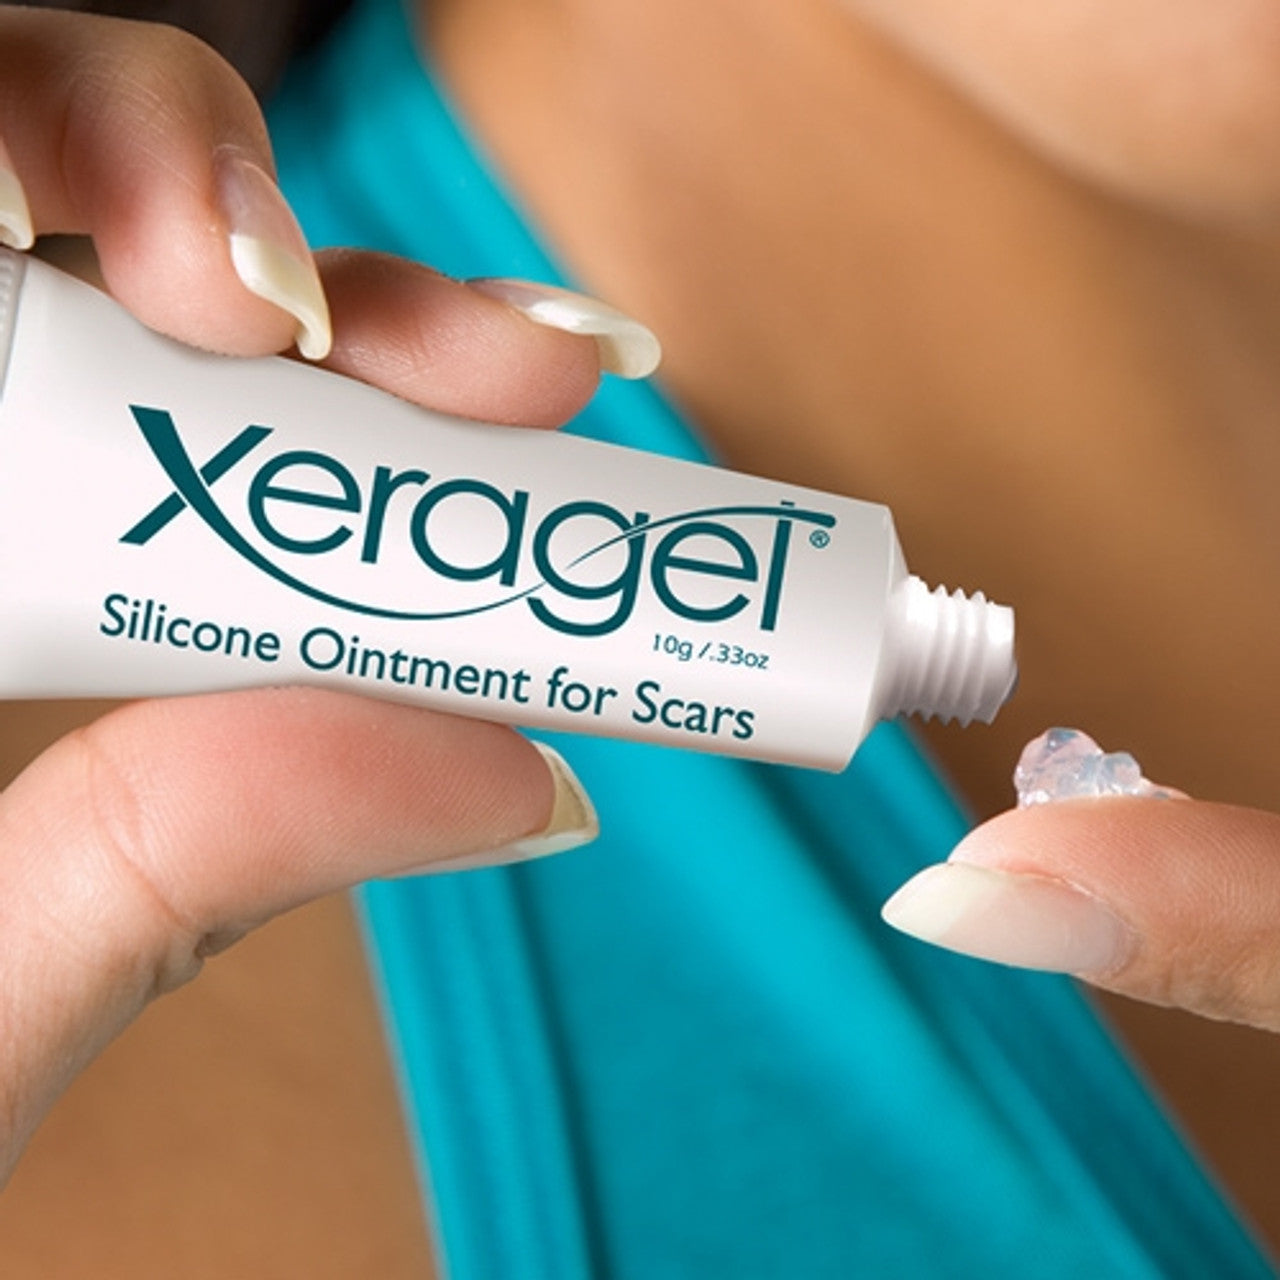 Xeragel Silicone Ointment